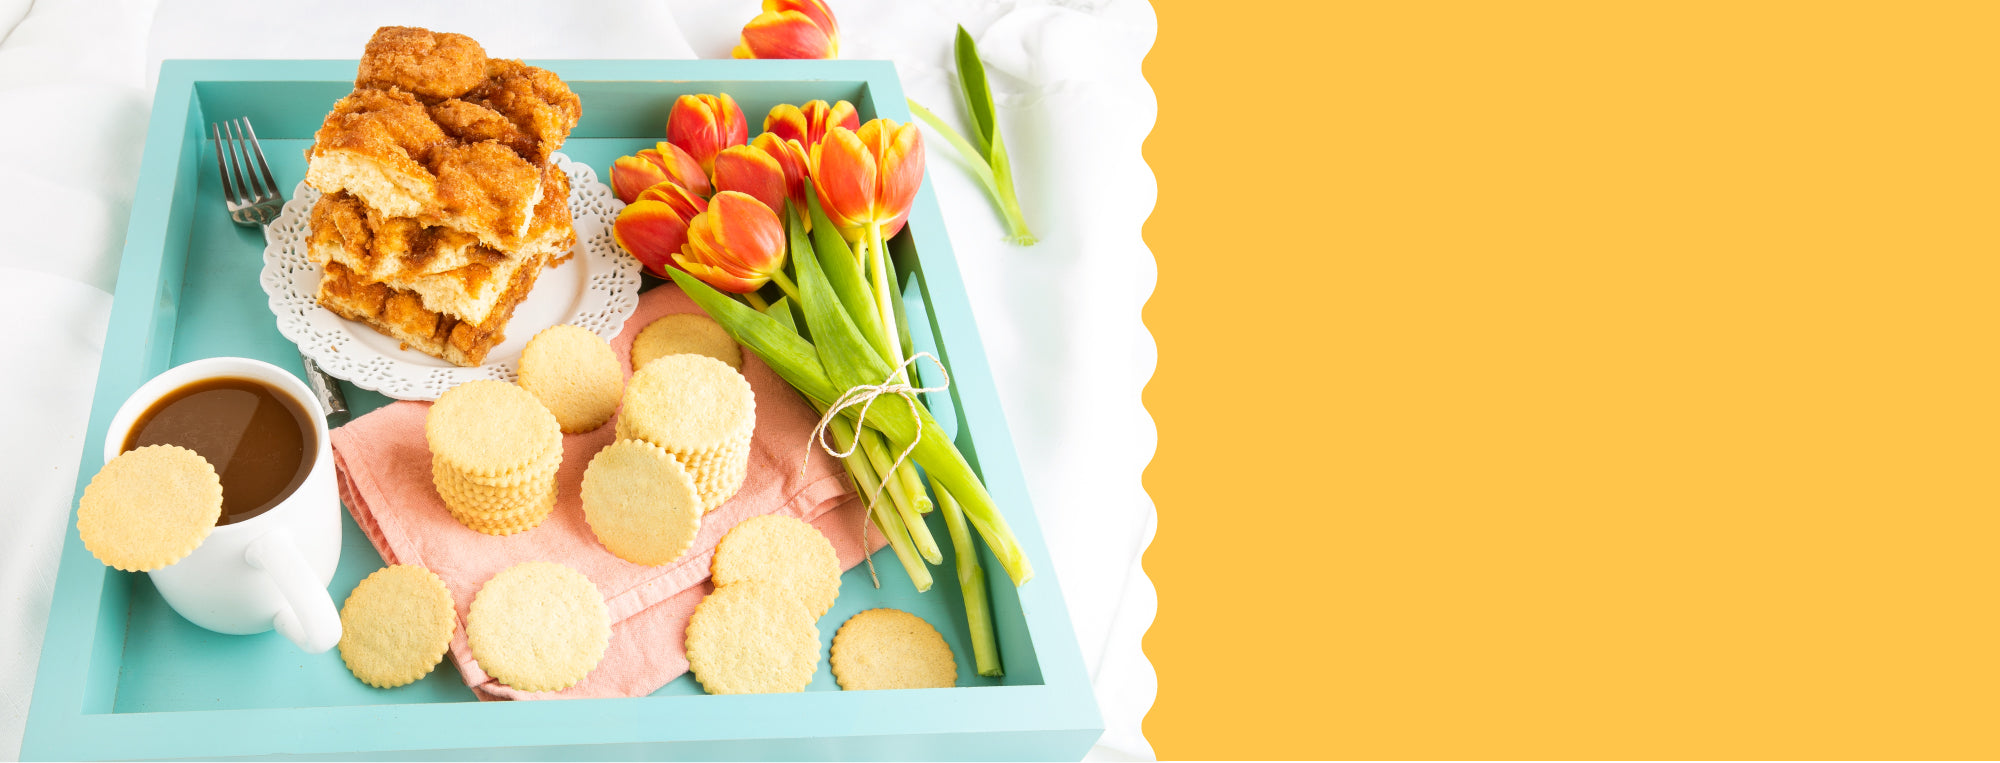 <p><strong>TREAT YOURSELF TO SCRUMPTIOUS SPRINGTIME BESTSELLERS!</strong></p>